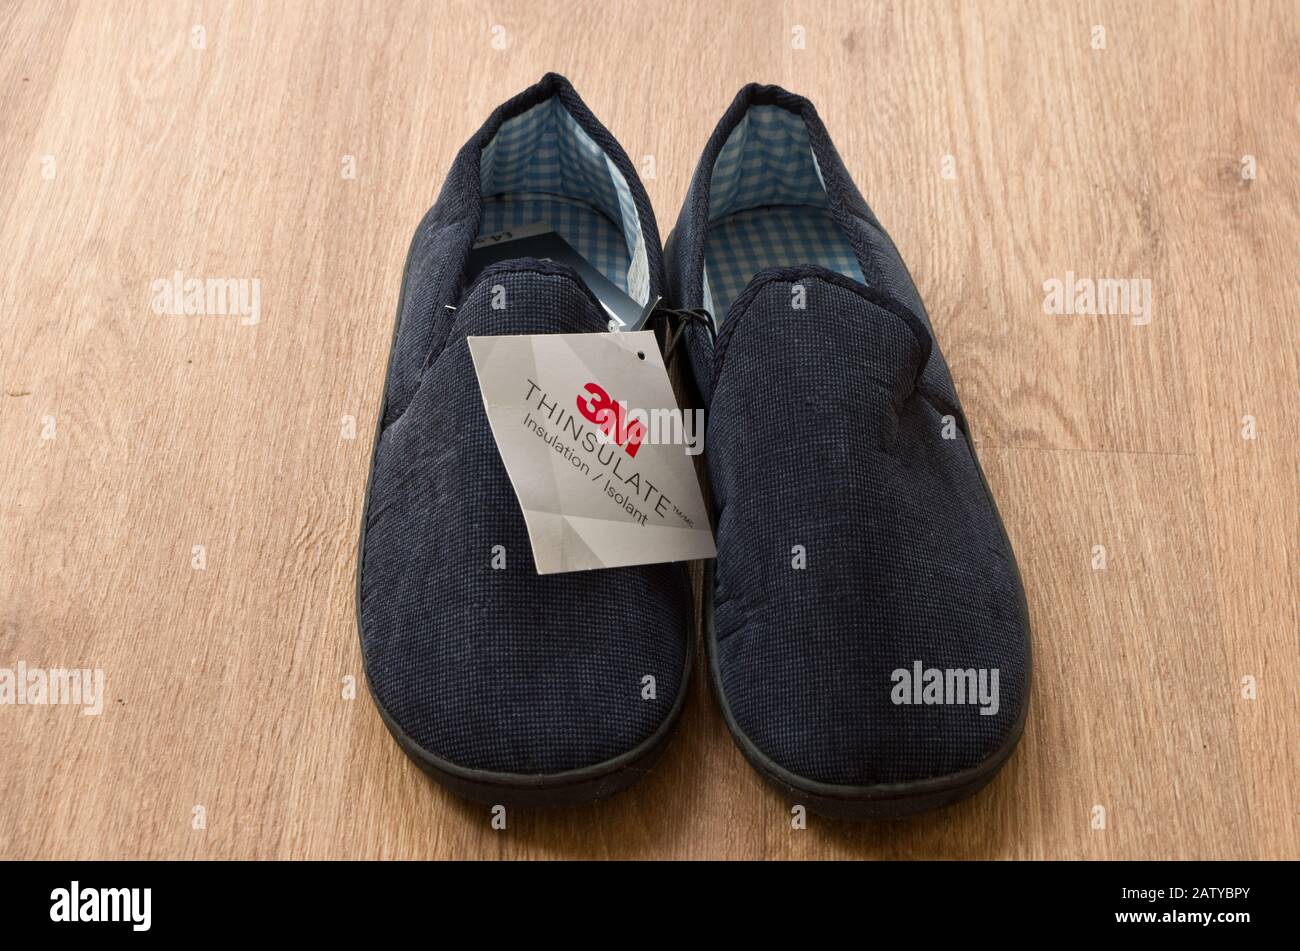 Pair of Men's Blue Fabric 3M Thinsulate Slippers Stock Photo - Alamy